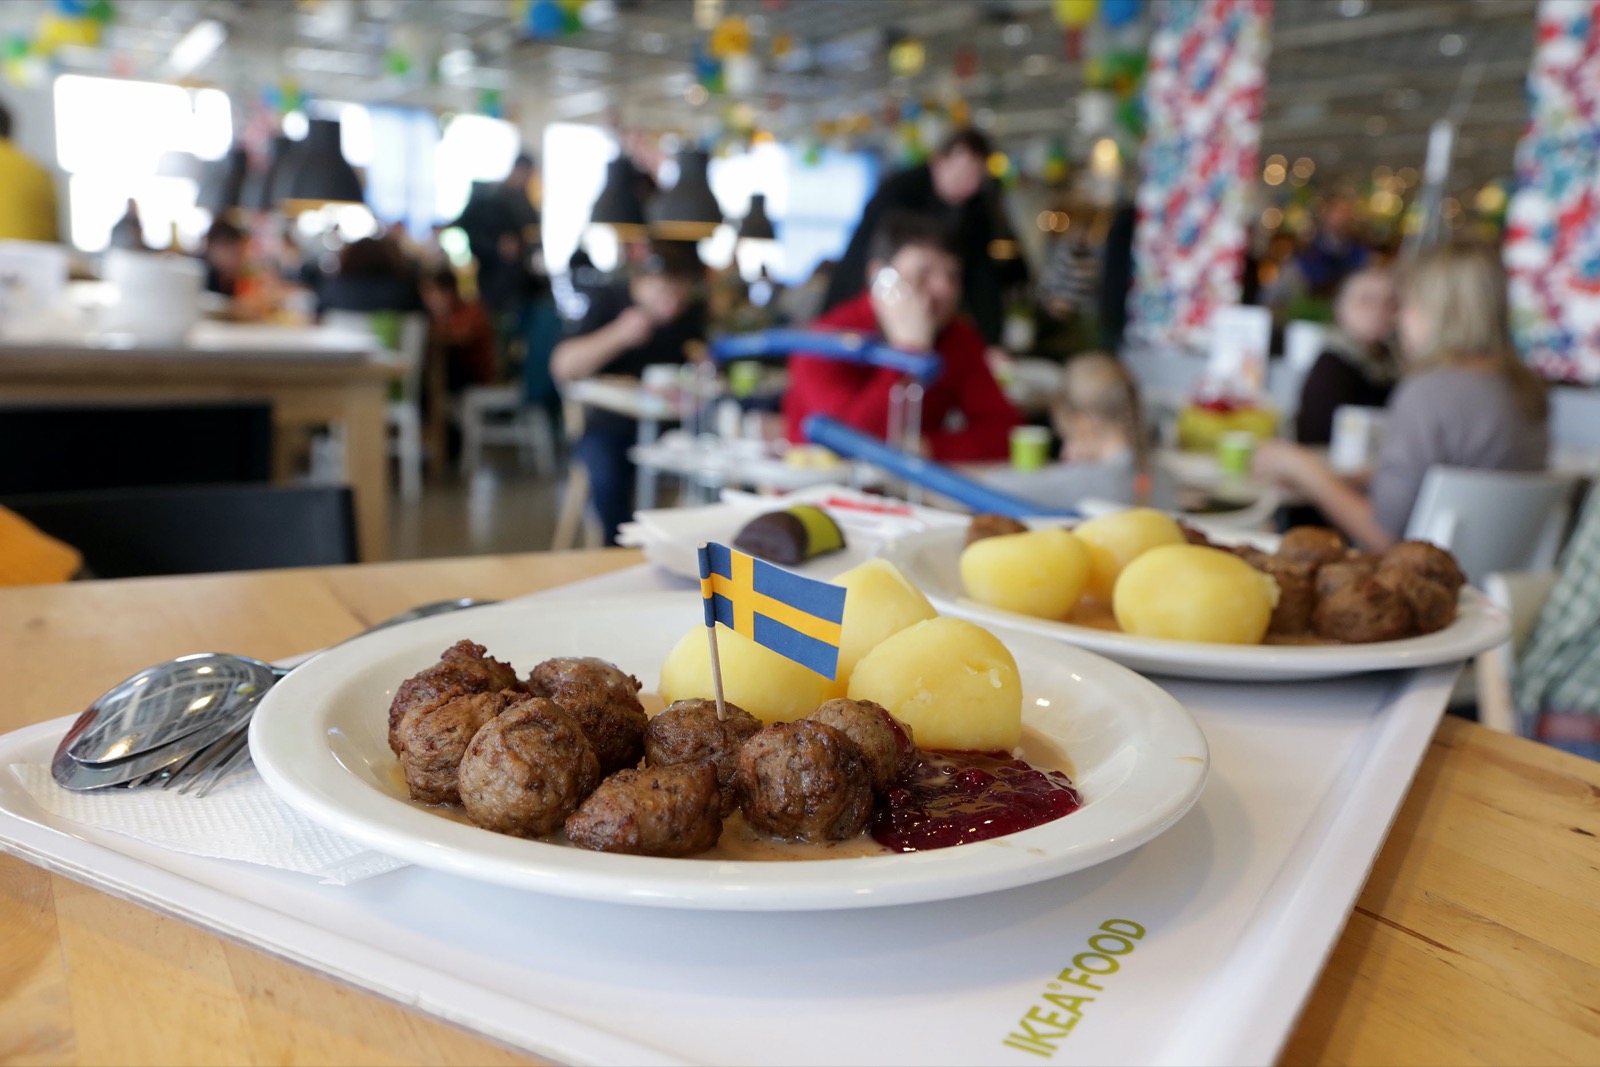 Can You Guess Countries Are by 3 Clues I Give You? Quiz IKEA Swedish meatballs